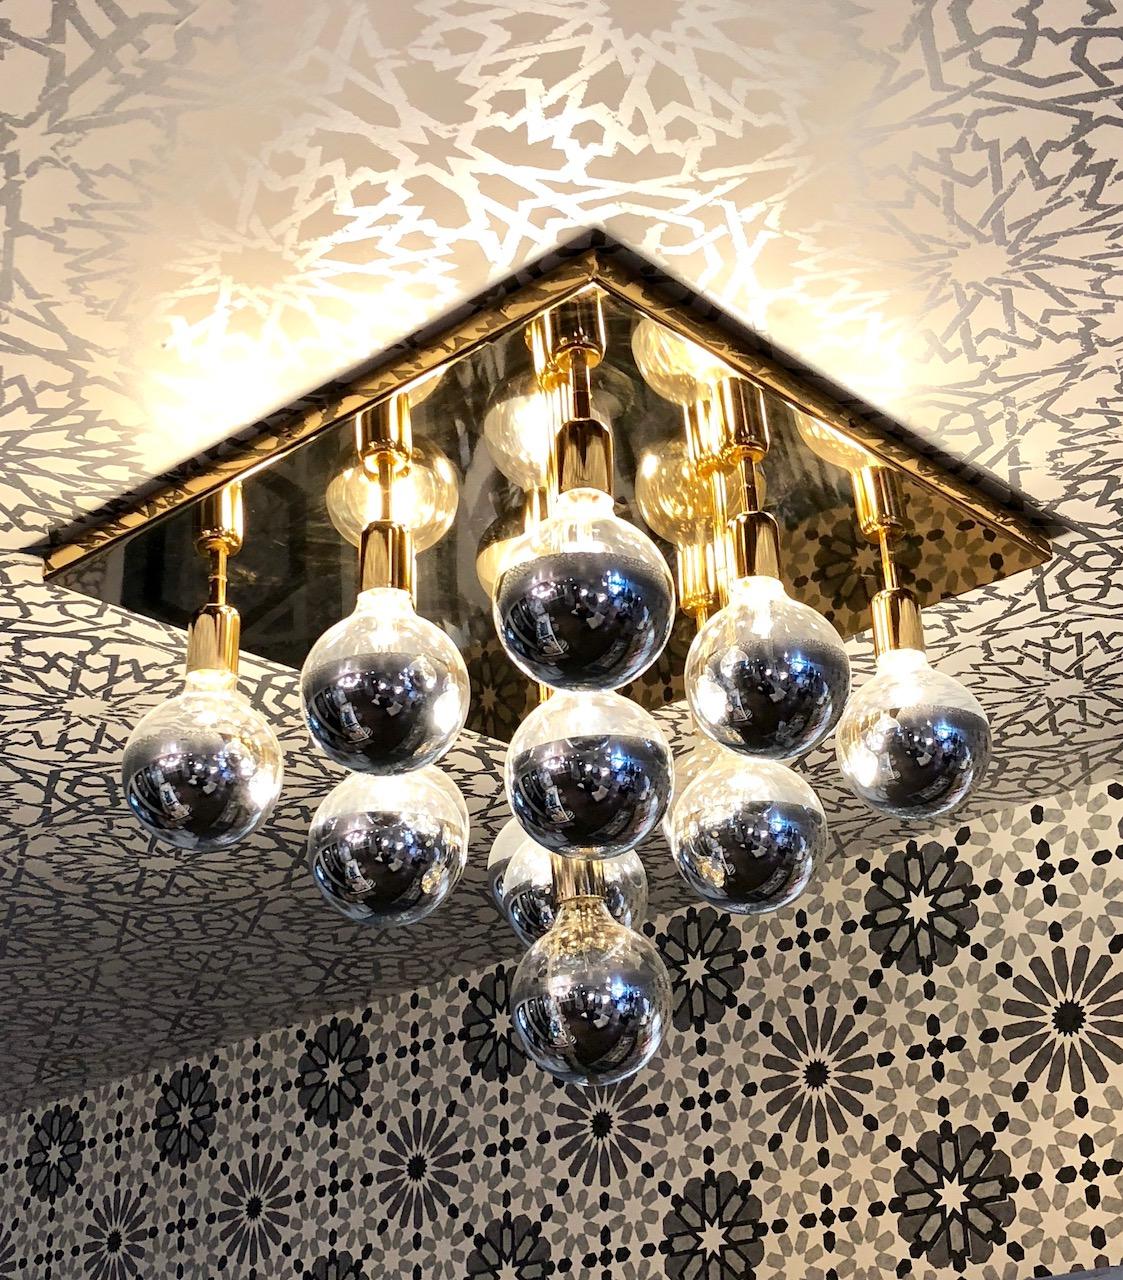 Brass flush mount light fixture. Square brass base with 13 dimmable mirrored top Bulbrites.
Can be installed as a ceiling or wall/sconce light.